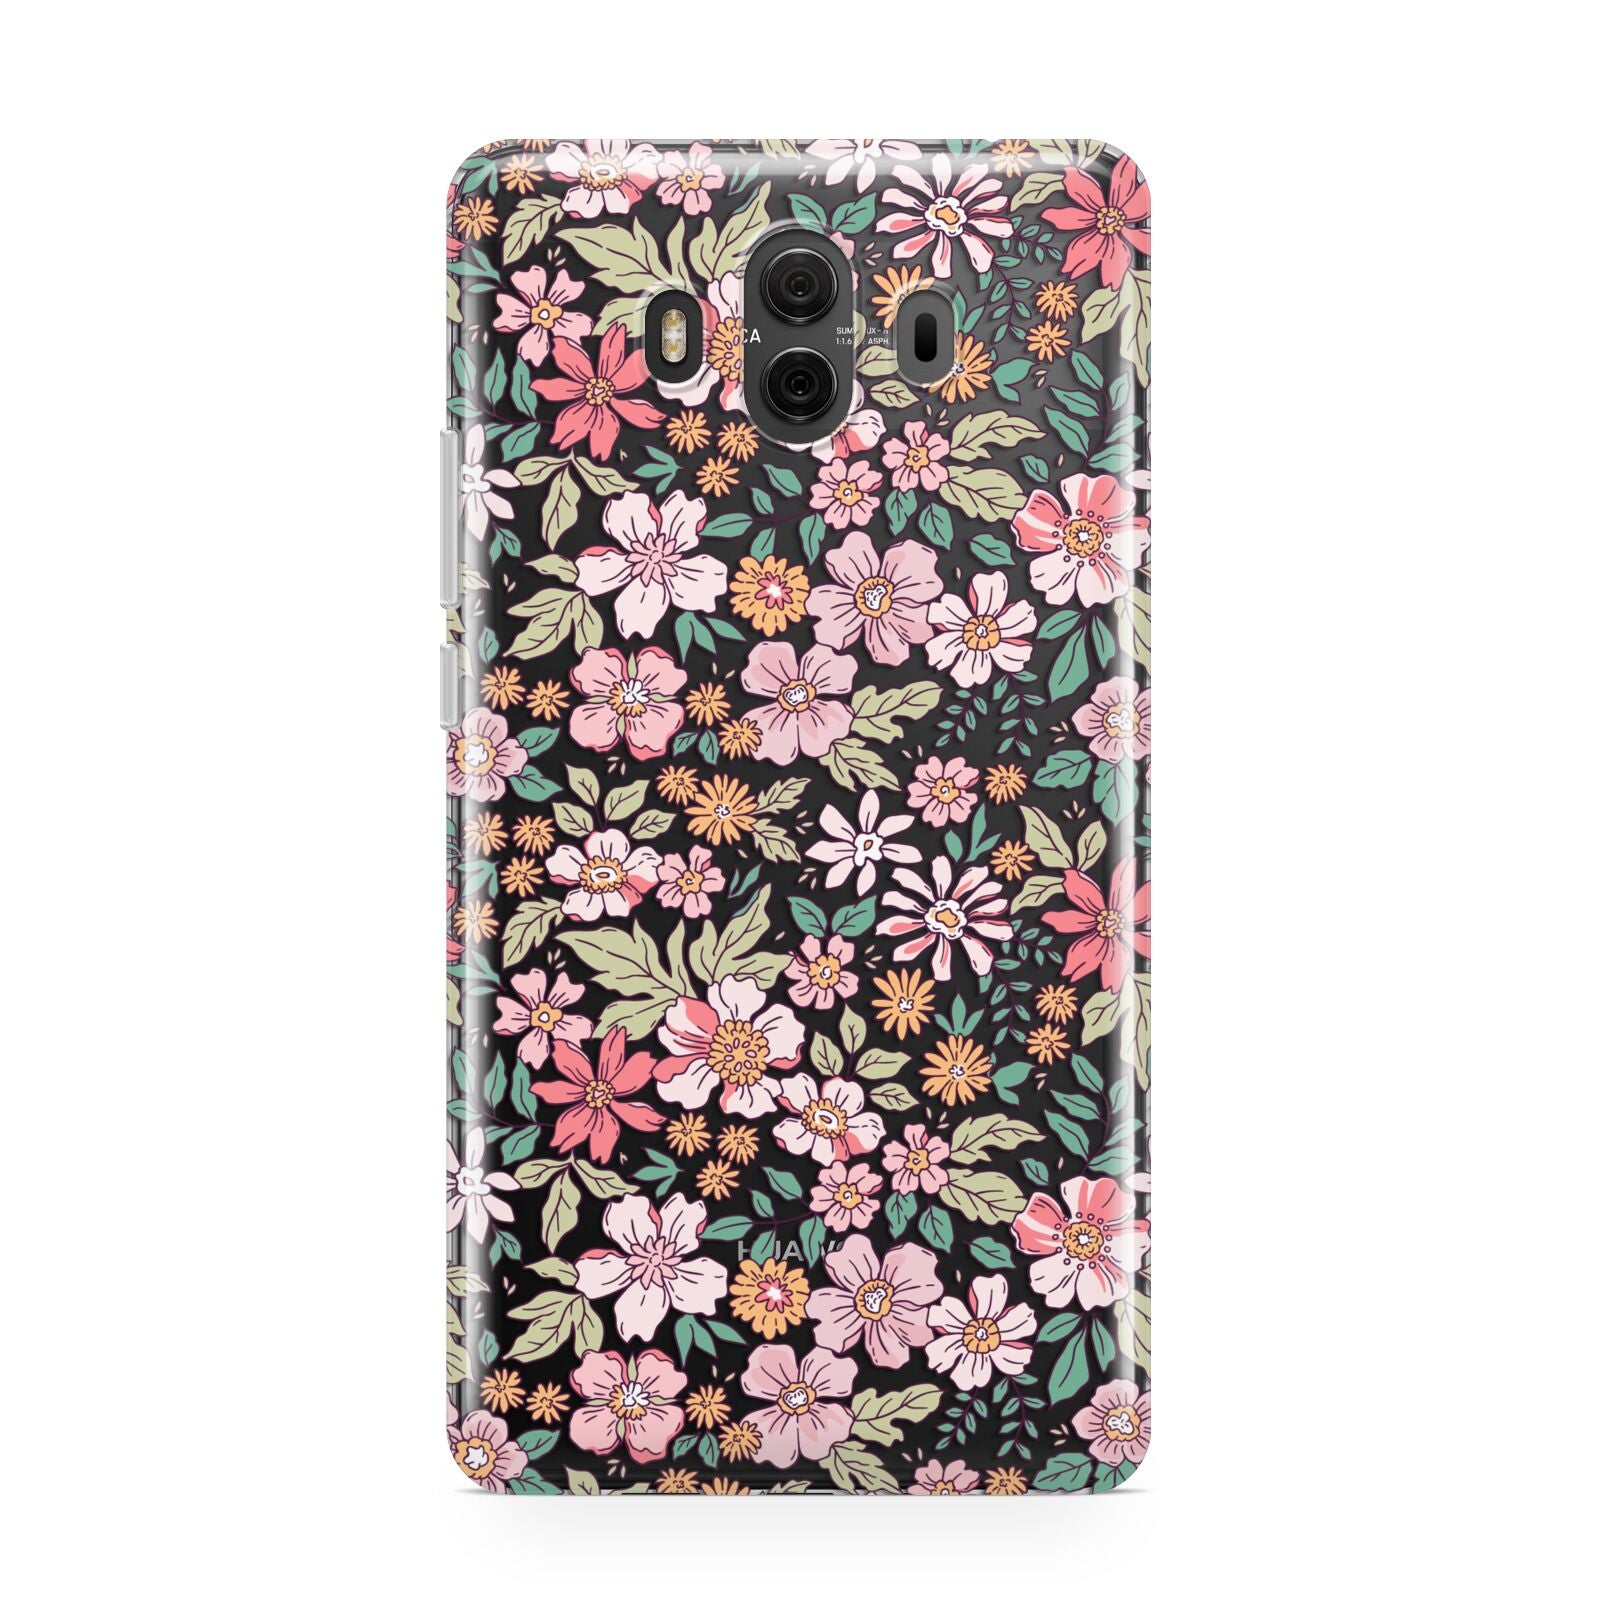 Small Floral Pattern Huawei Mate 10 Protective Phone Case